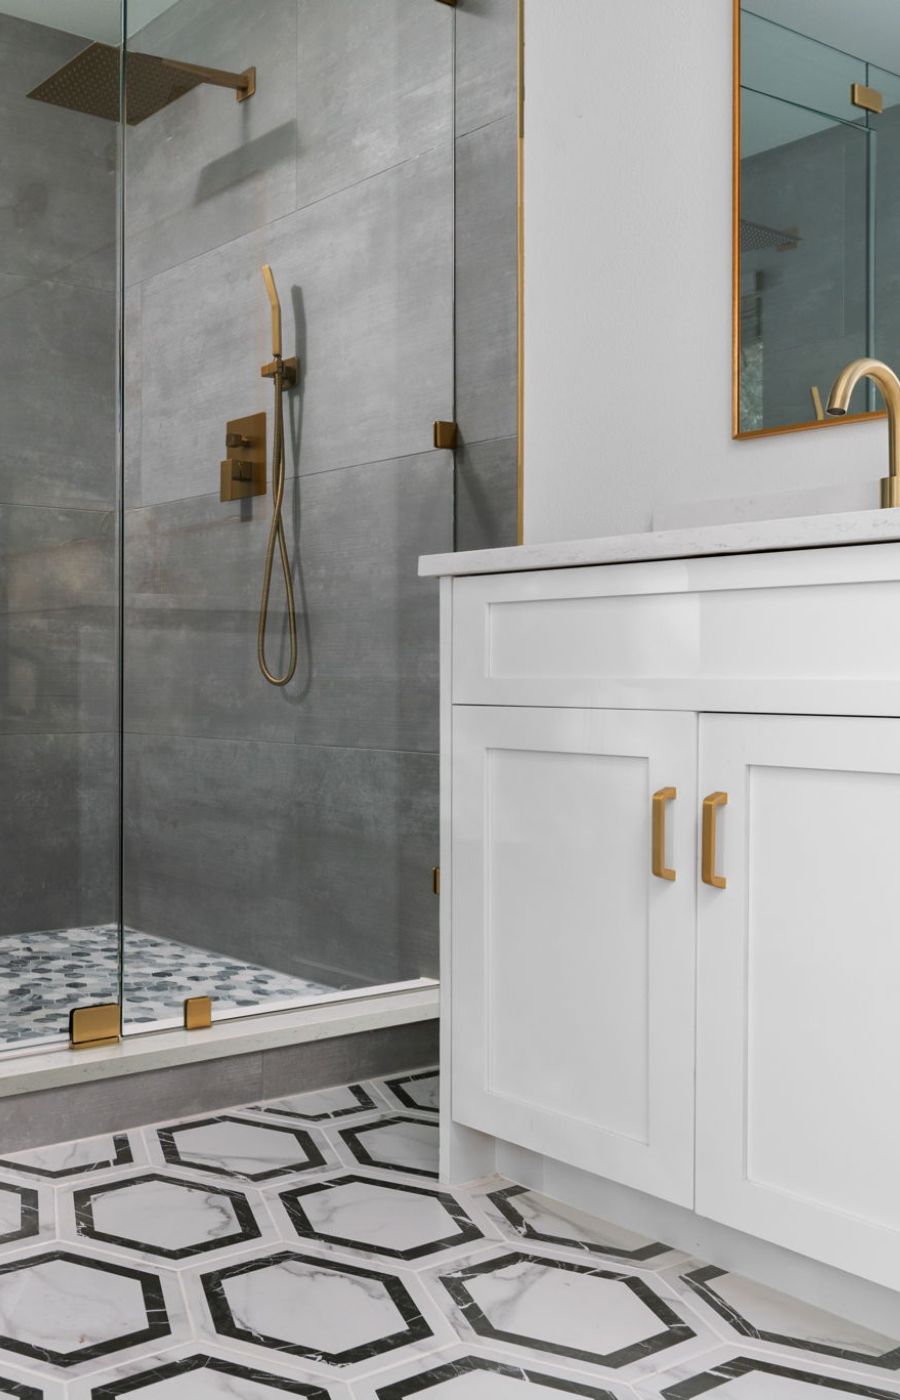 A stylish and contemporary bathroom featuring a shower with sleek grey tiles contrasted beautifully with gold fixtures that add a touch of luxury. The white bathroom vanity provides a clean and modern focal point, complemented by decorative white and grey tiles that enhance the space with a subtle pattern.